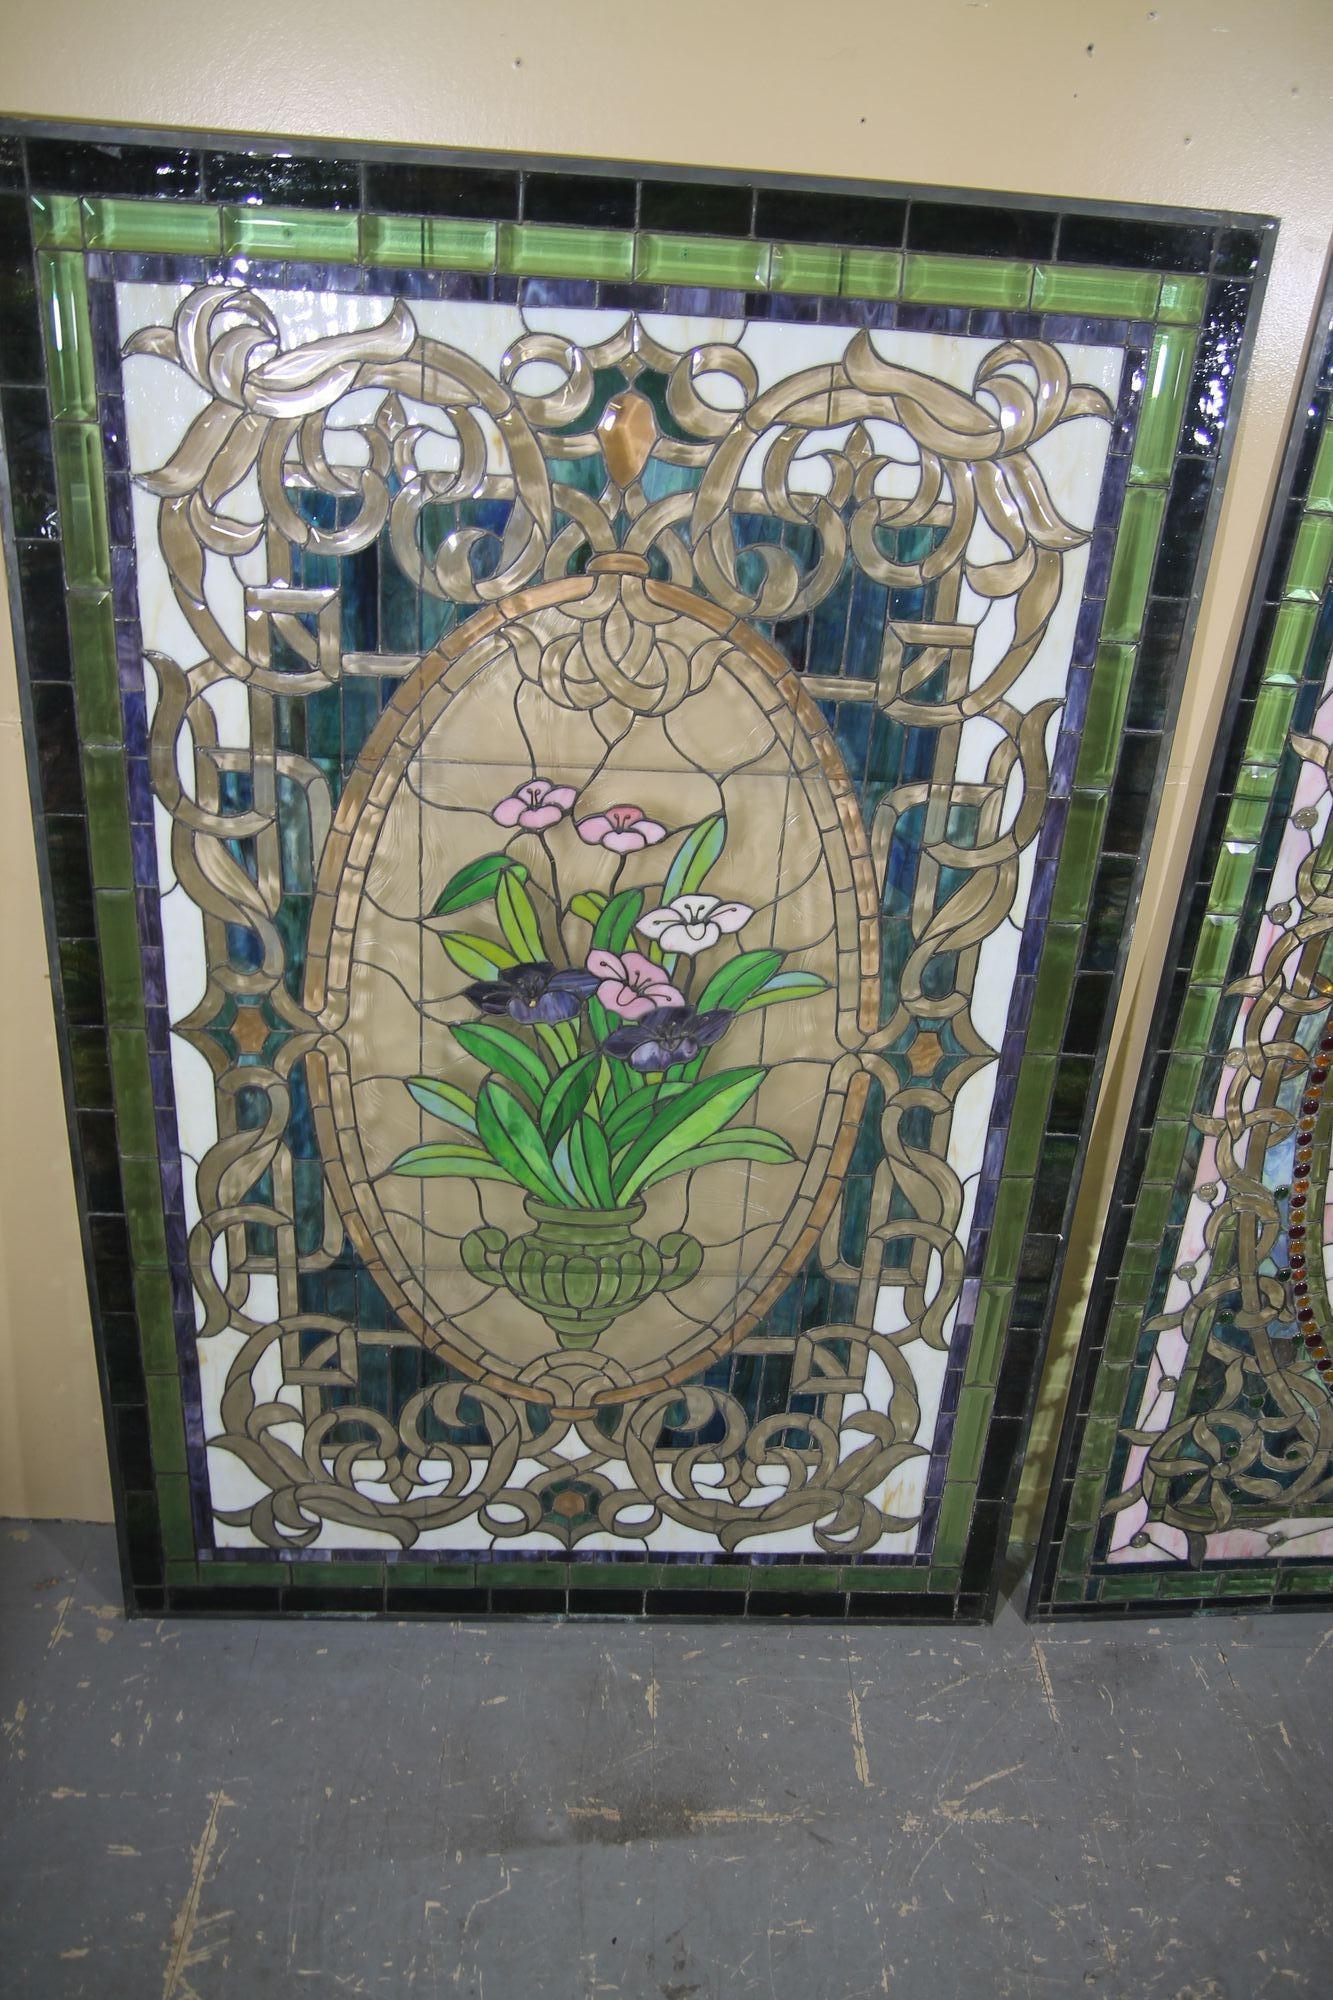 Pleased to offer this great stain glass panel by NJ artist Doug Hartman. This amazing panel was designed about 30 years ago but was never installed by the client. Dougs work is amazing and sadly Doug passed away in 2014. This panel looks even better